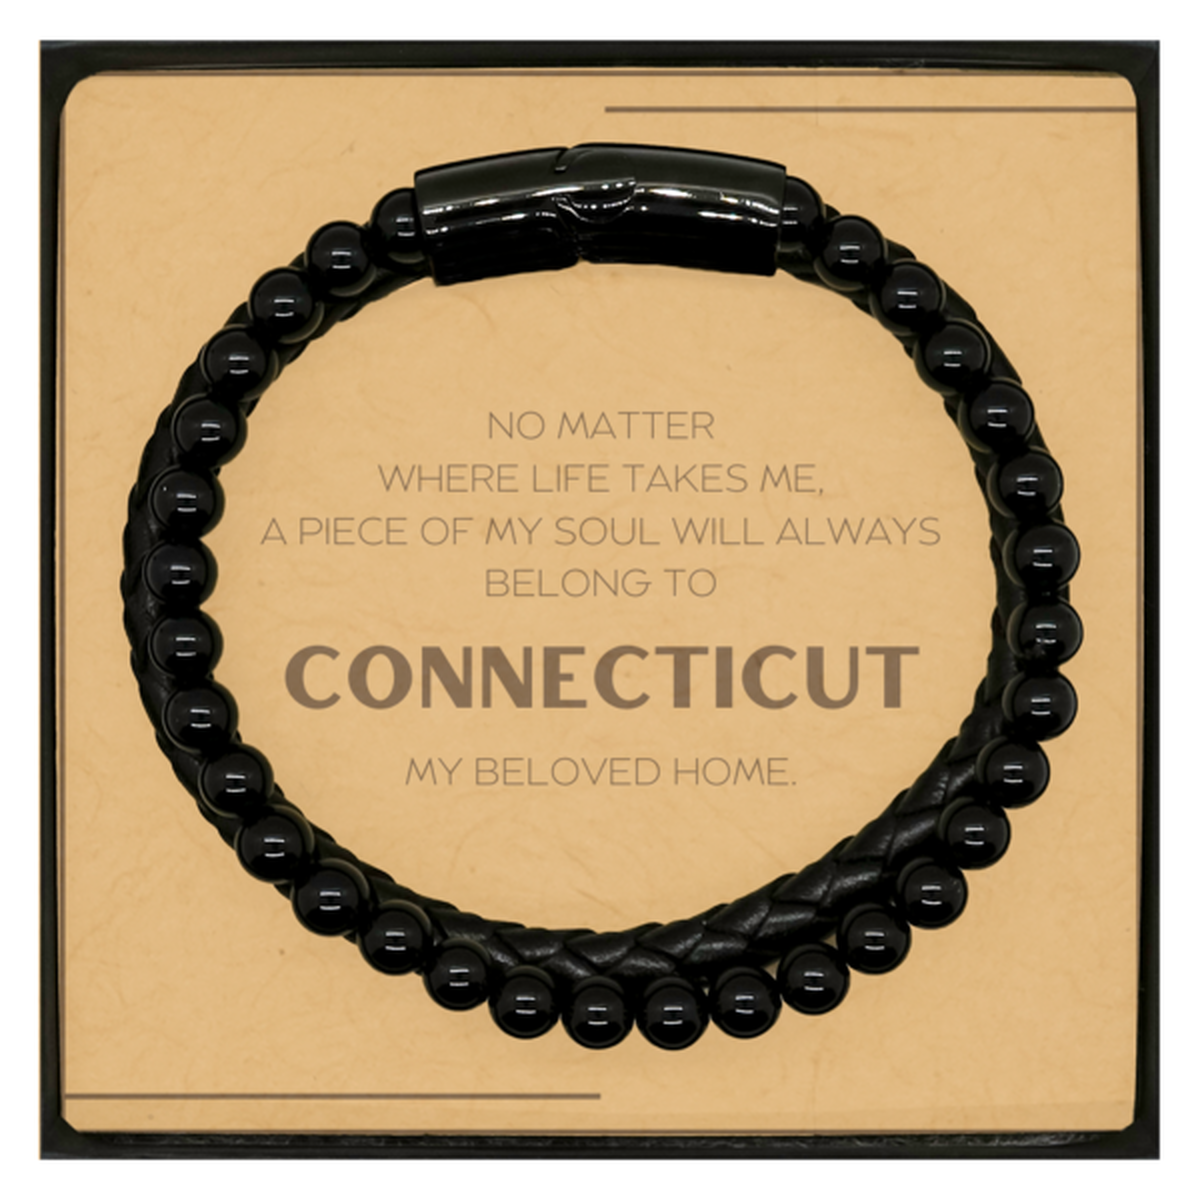 Love Connecticut State Gifts, My soul will always belong to Connecticut, Proud Stone Leather Bracelets, Birthday Christmas Unique Gifts For Connecticut Men, Women, Friends